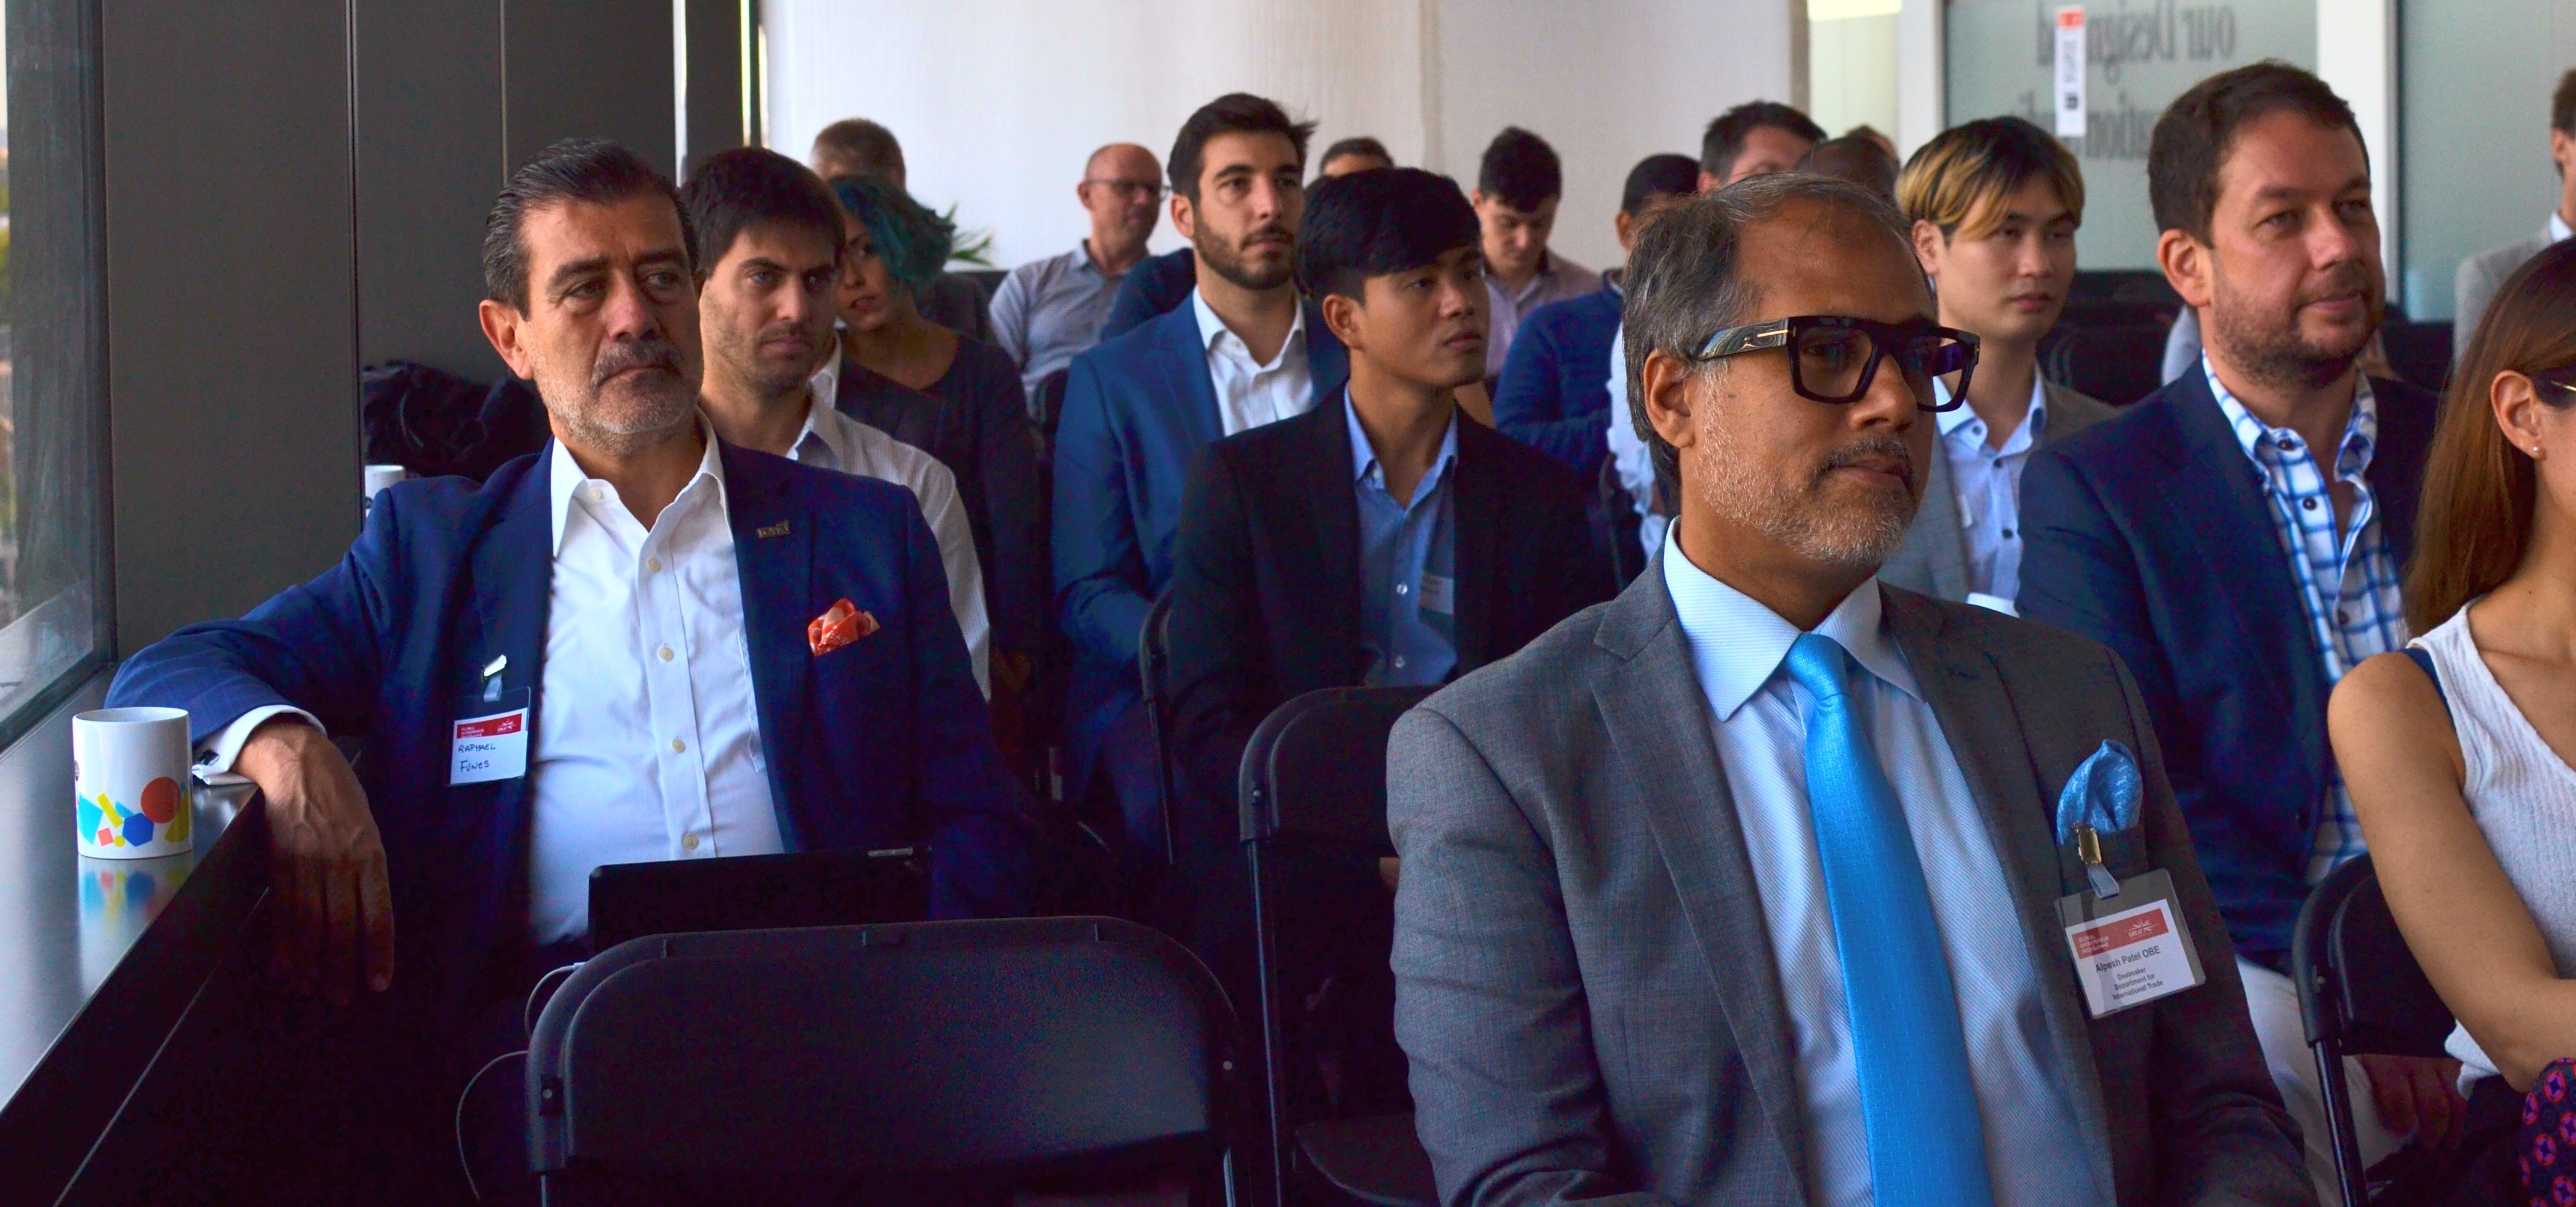 GEP Masterclass event at London Tech Week Sept 2021, hosted by WONGDOODY - section of the audience